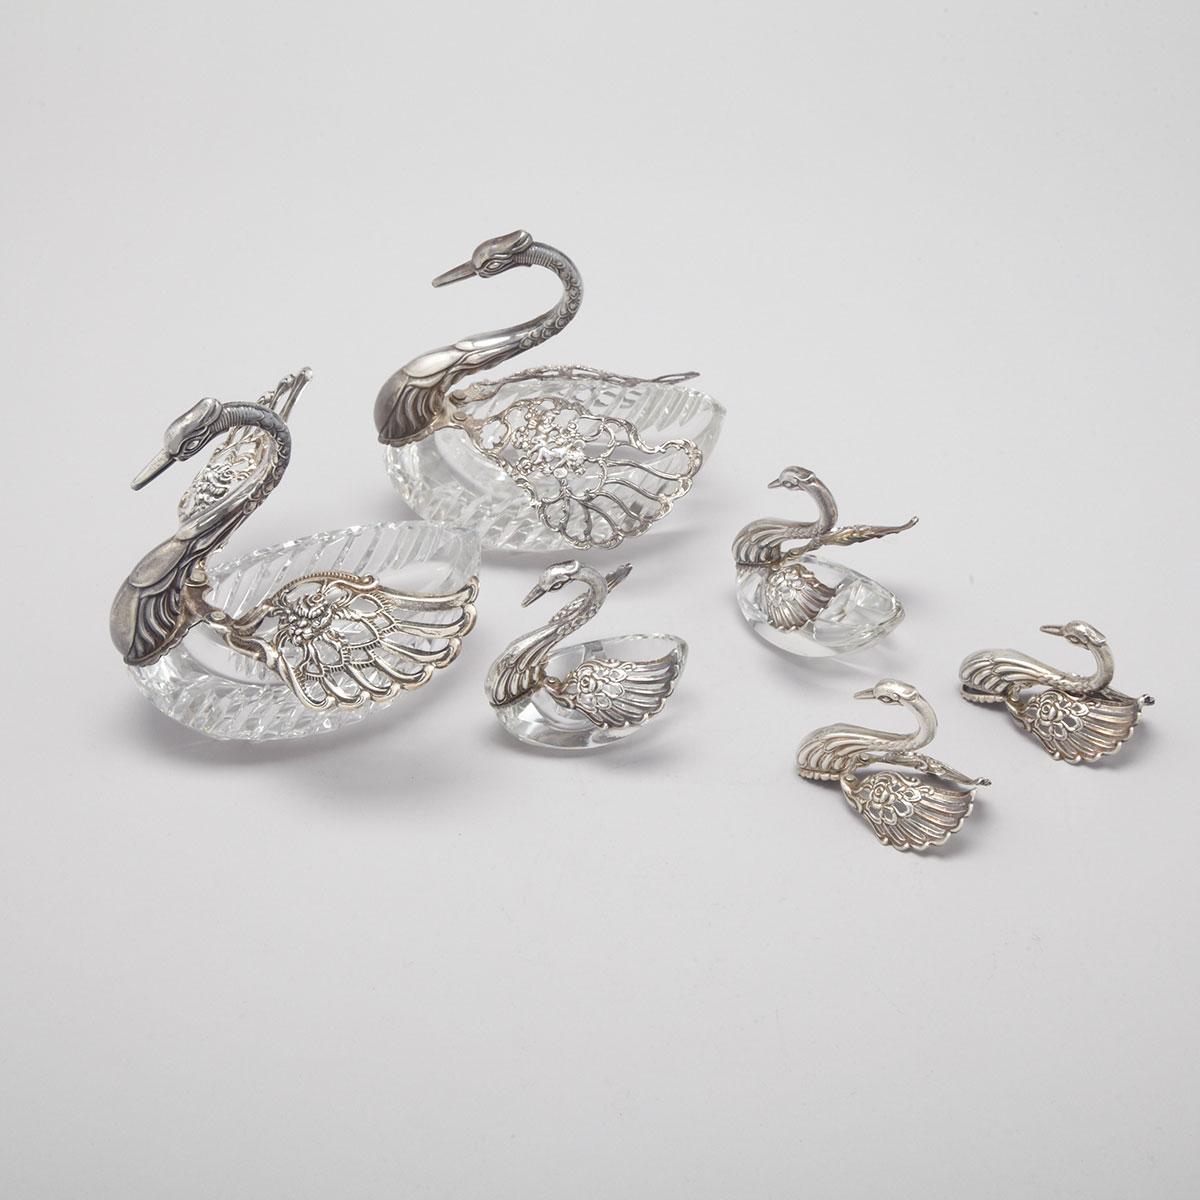 Group of Continental Silver Mounted Cut Glass Swan Salt Cellars, c.1956-73